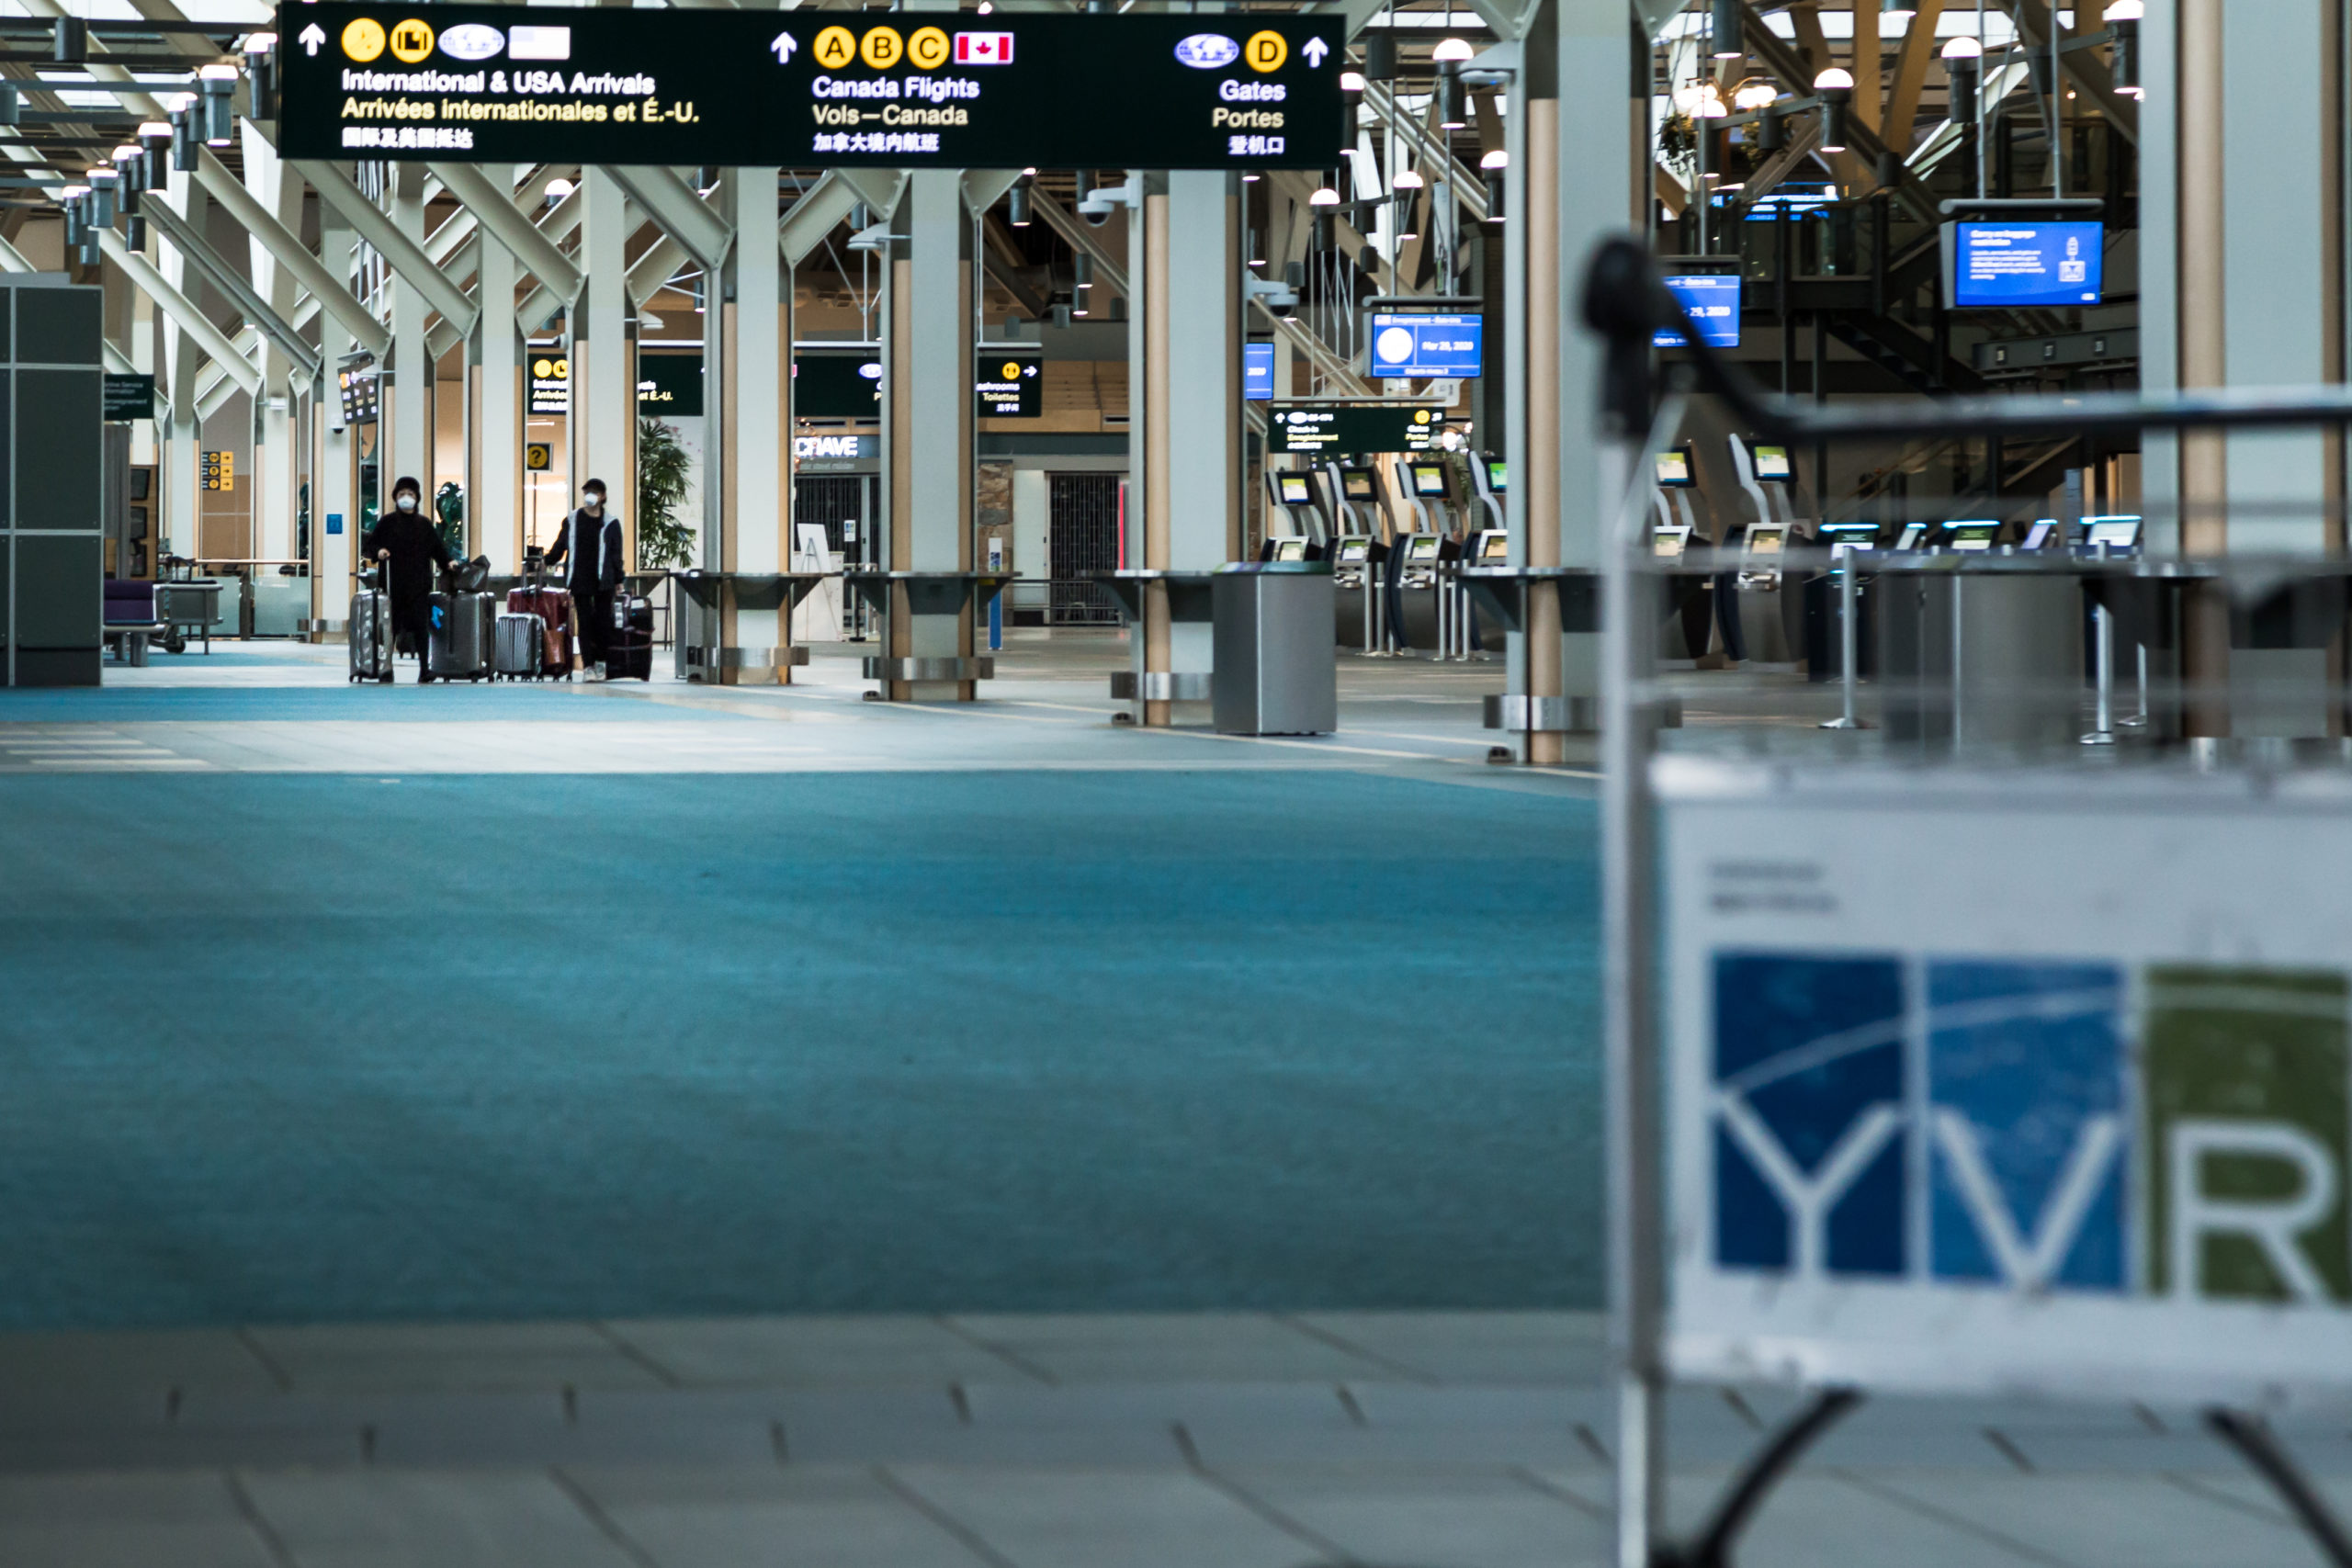 YVR voted best airport in North America for 12th consecutive year